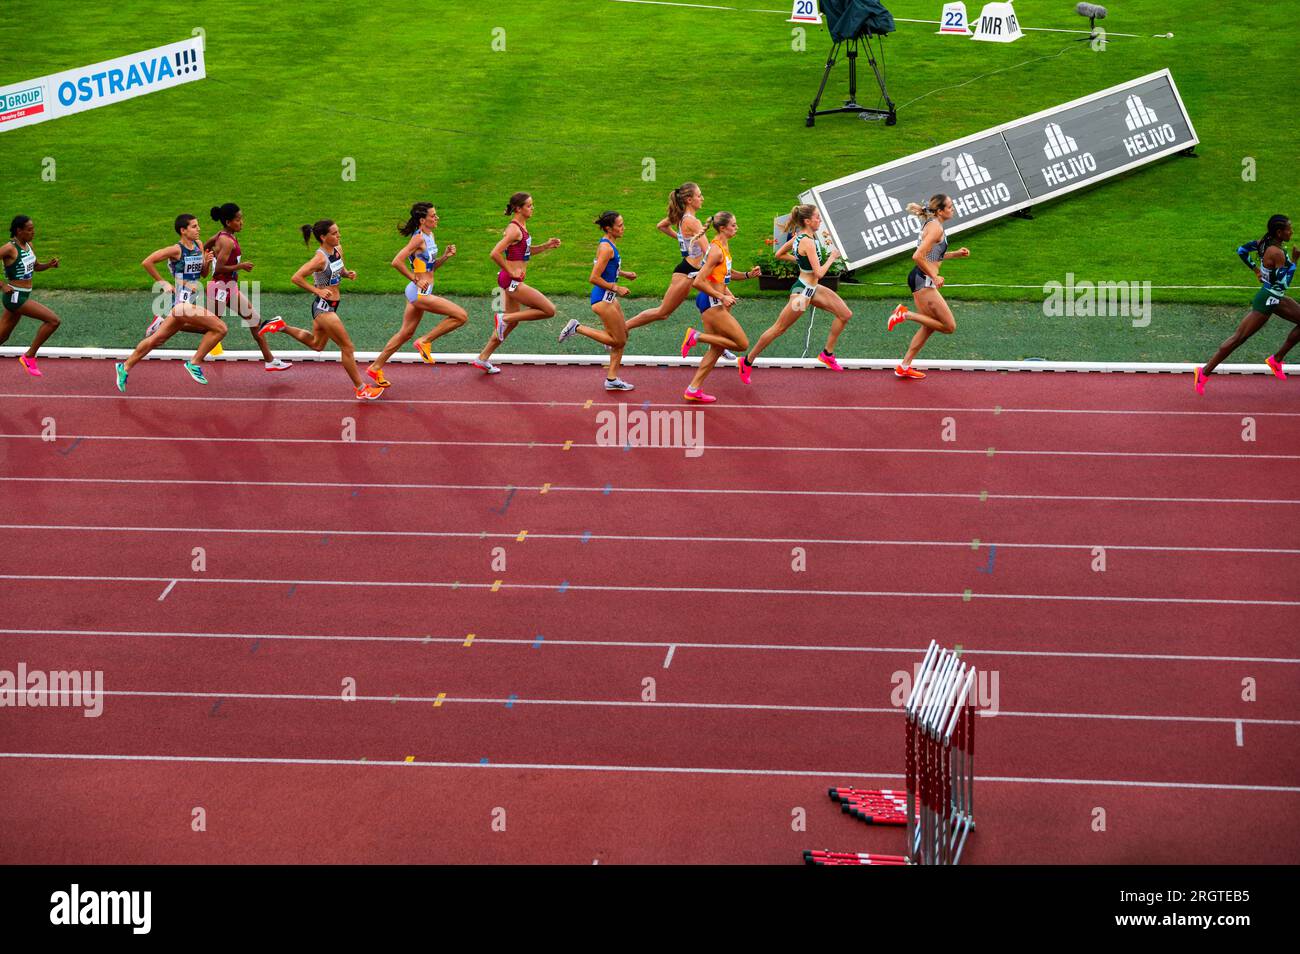 OSTRAVA, CZECHIA, JUNE 27, 2023: Intense 1500m Female Race Visual at Track and Field Meet for Worlds in Budapest and Summer olympic Games in Pari Stock Photo